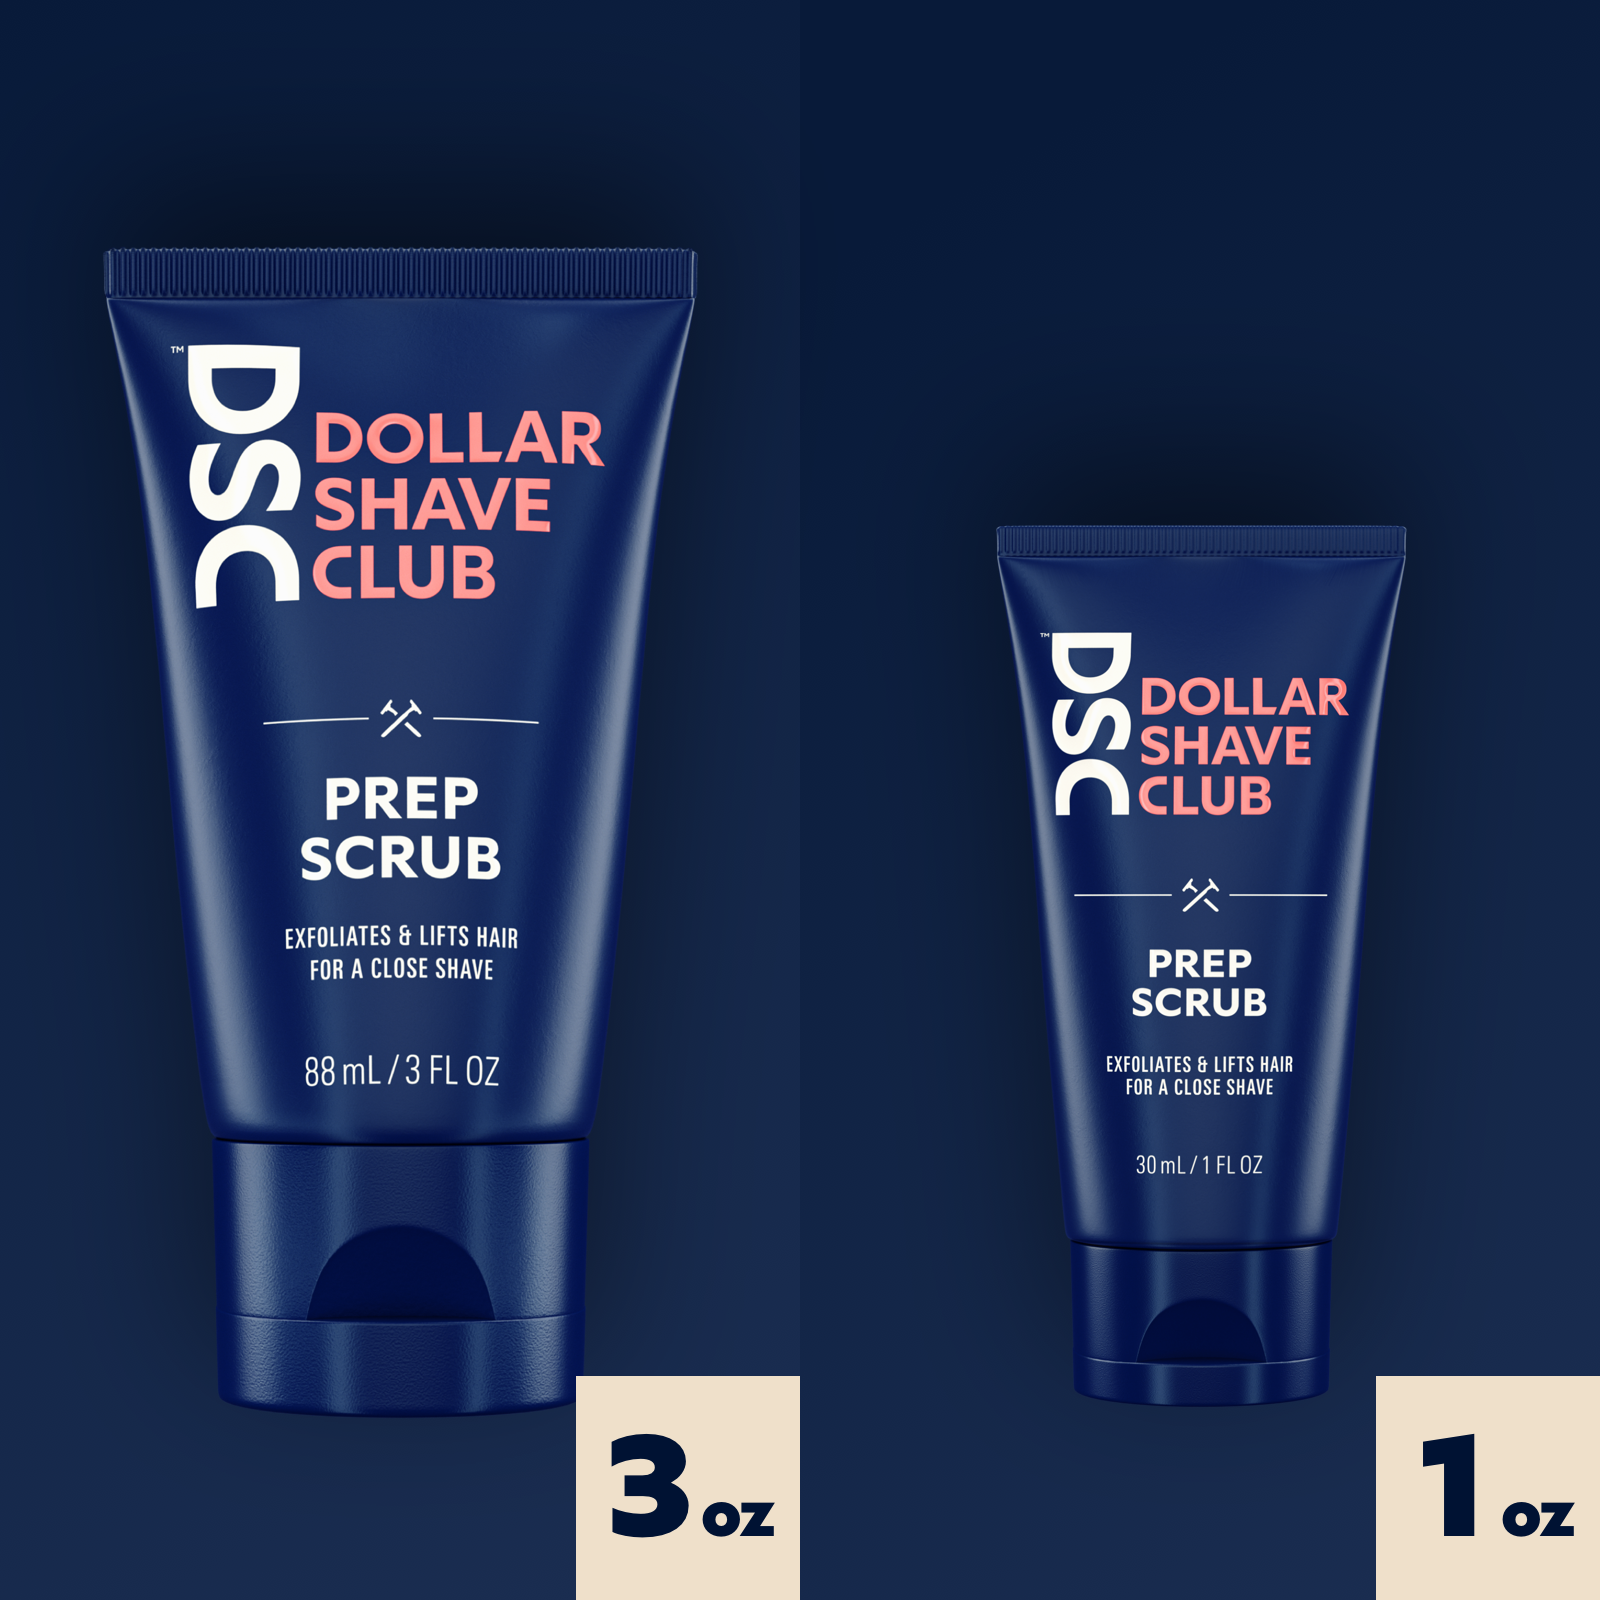 Dollar Shave Club Prep Scrub trial size product versus full size product.